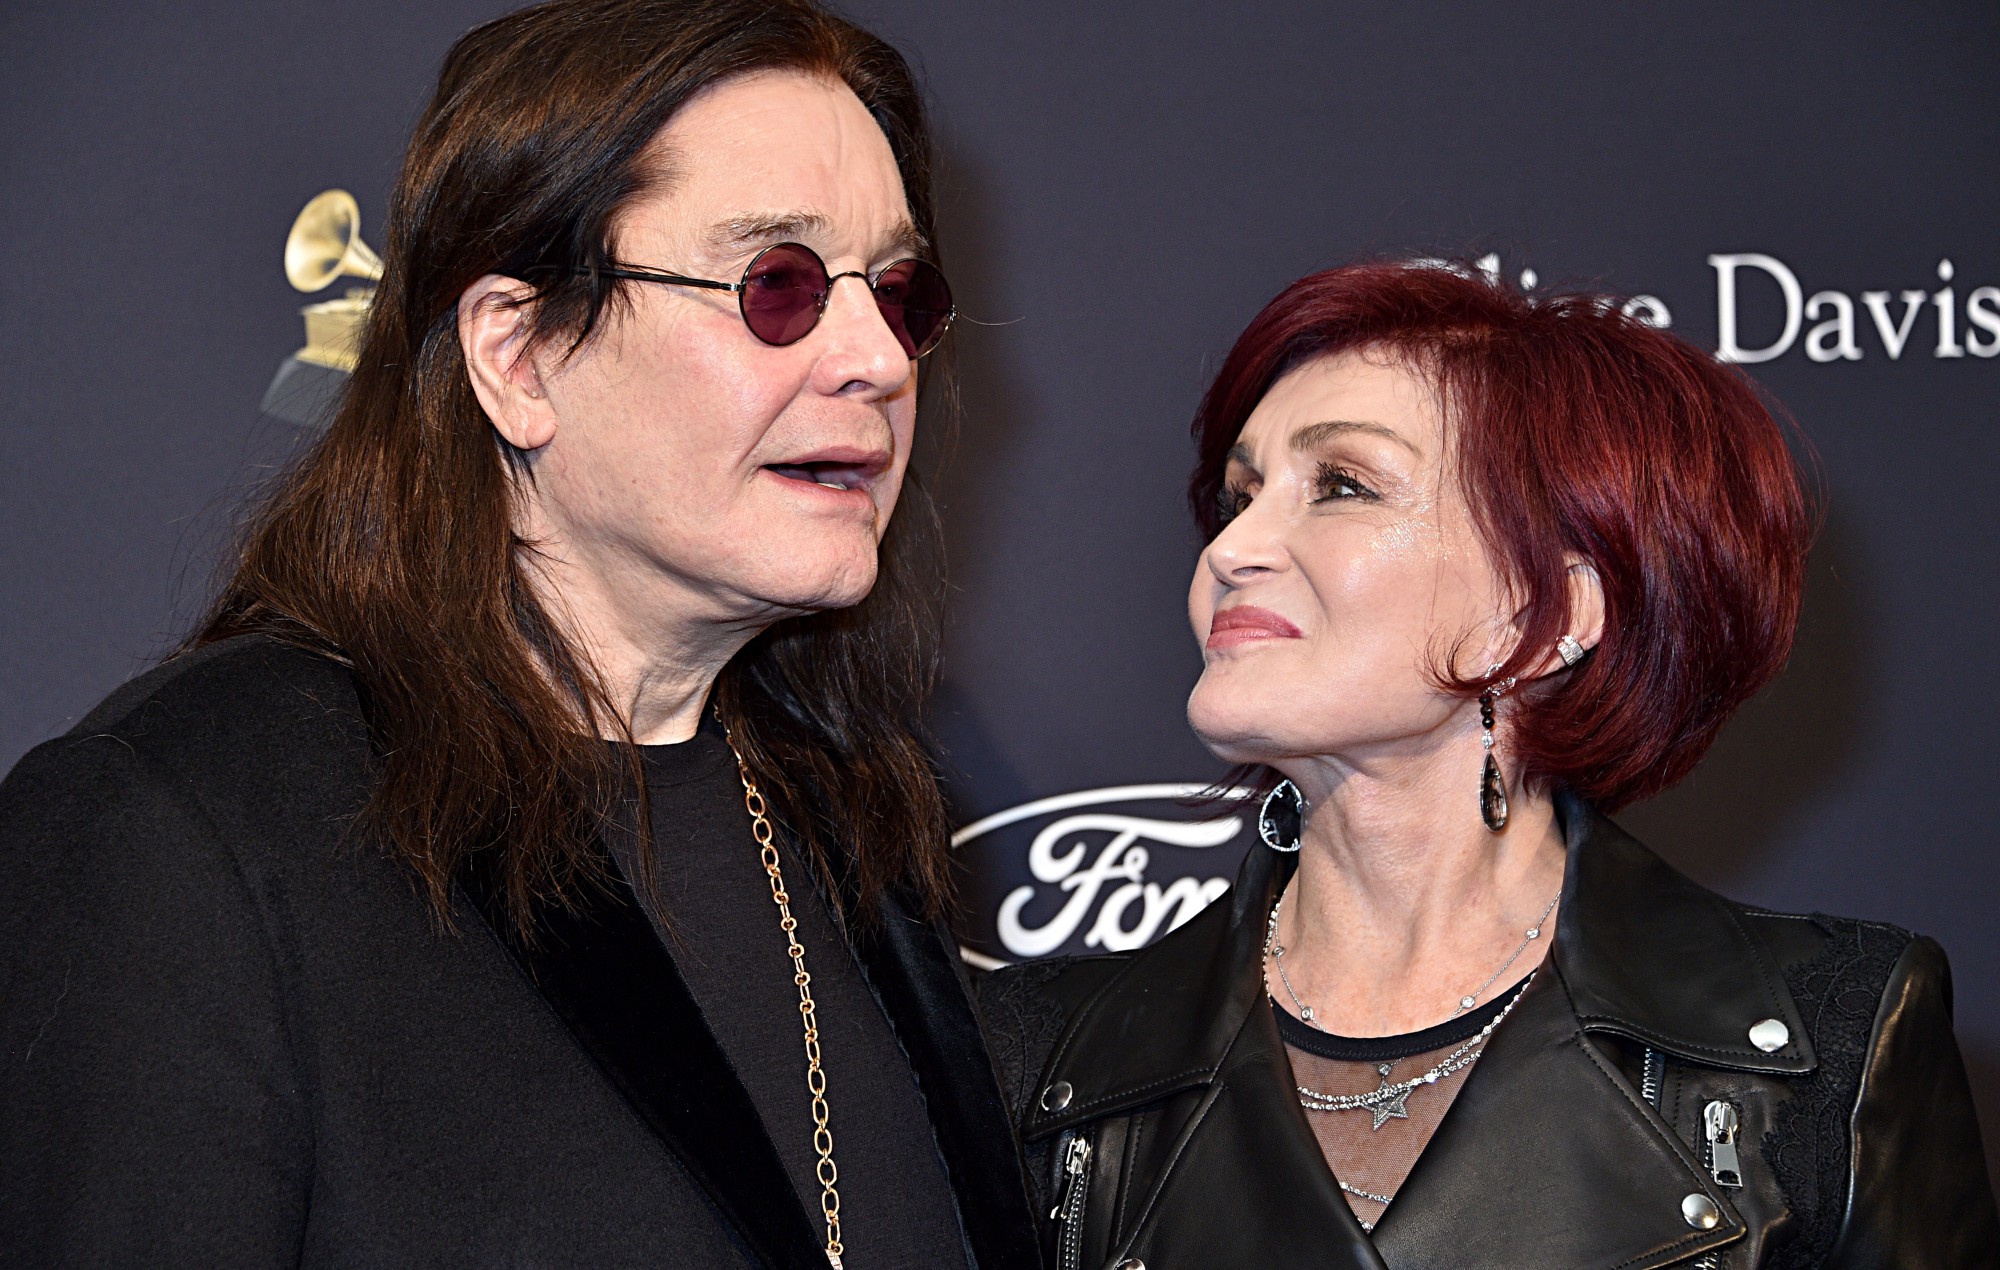 Sharon Osbourne says it’s “heartbreaking” to see Ozzy “not self-sufficient”